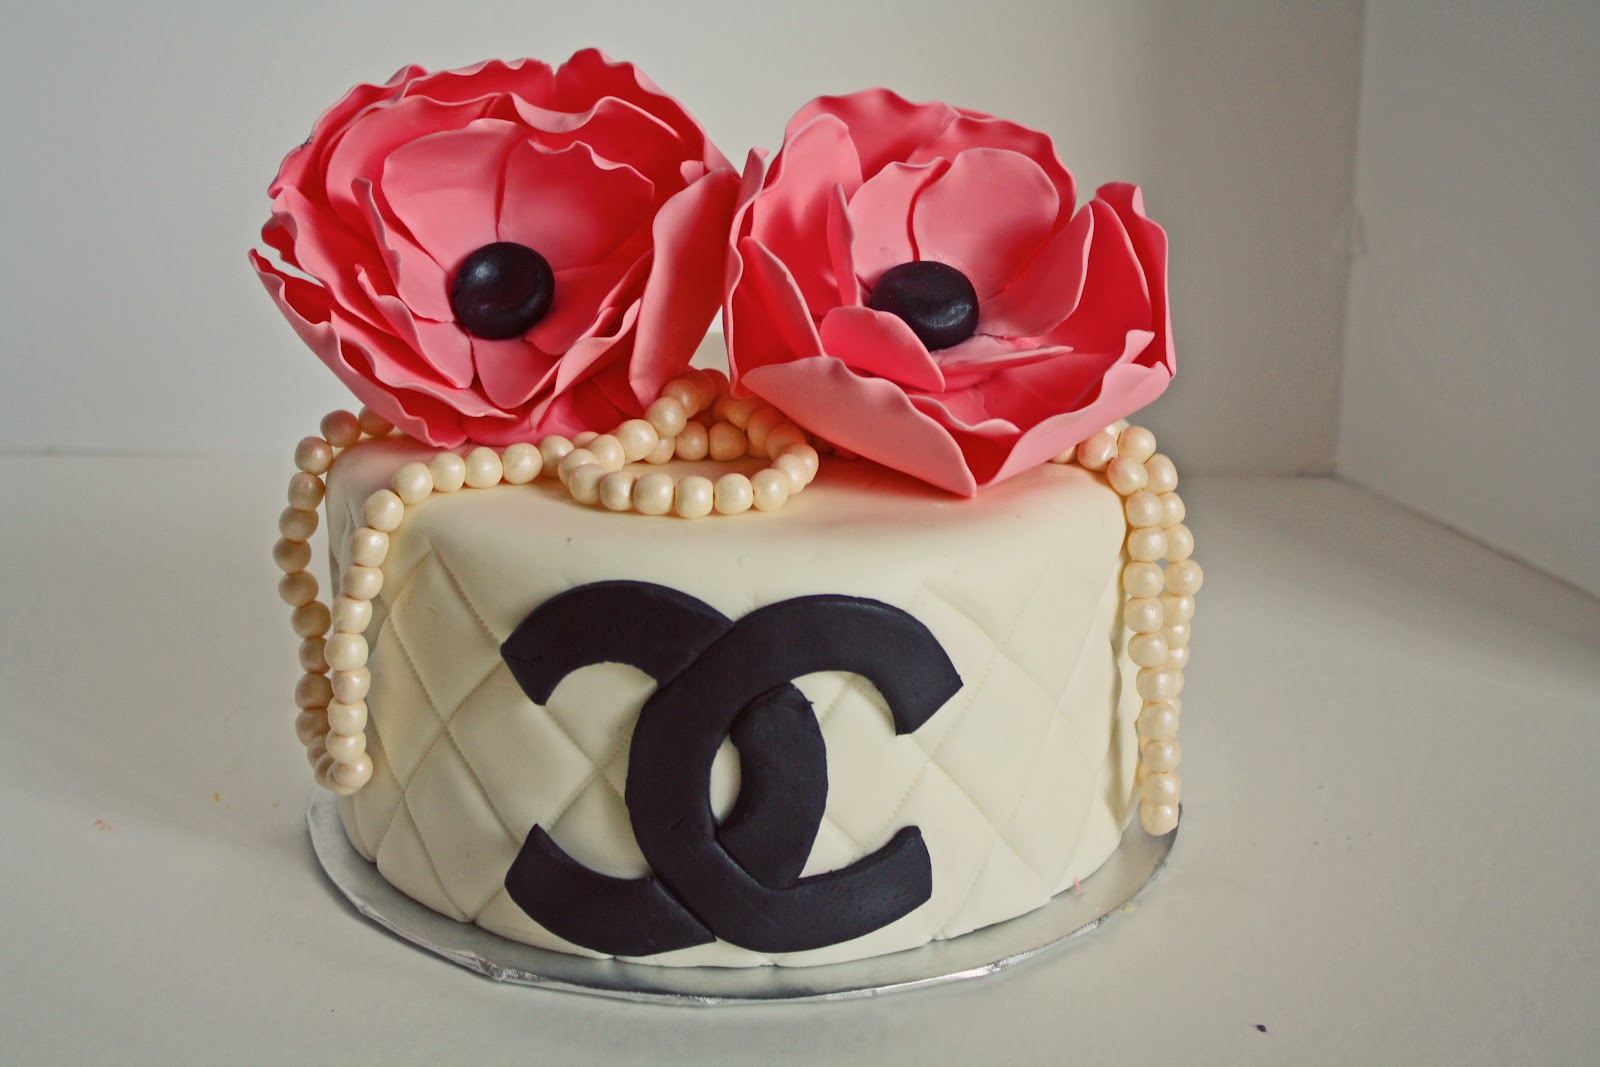 Chanel, Pearls and Flowers birthday cake.